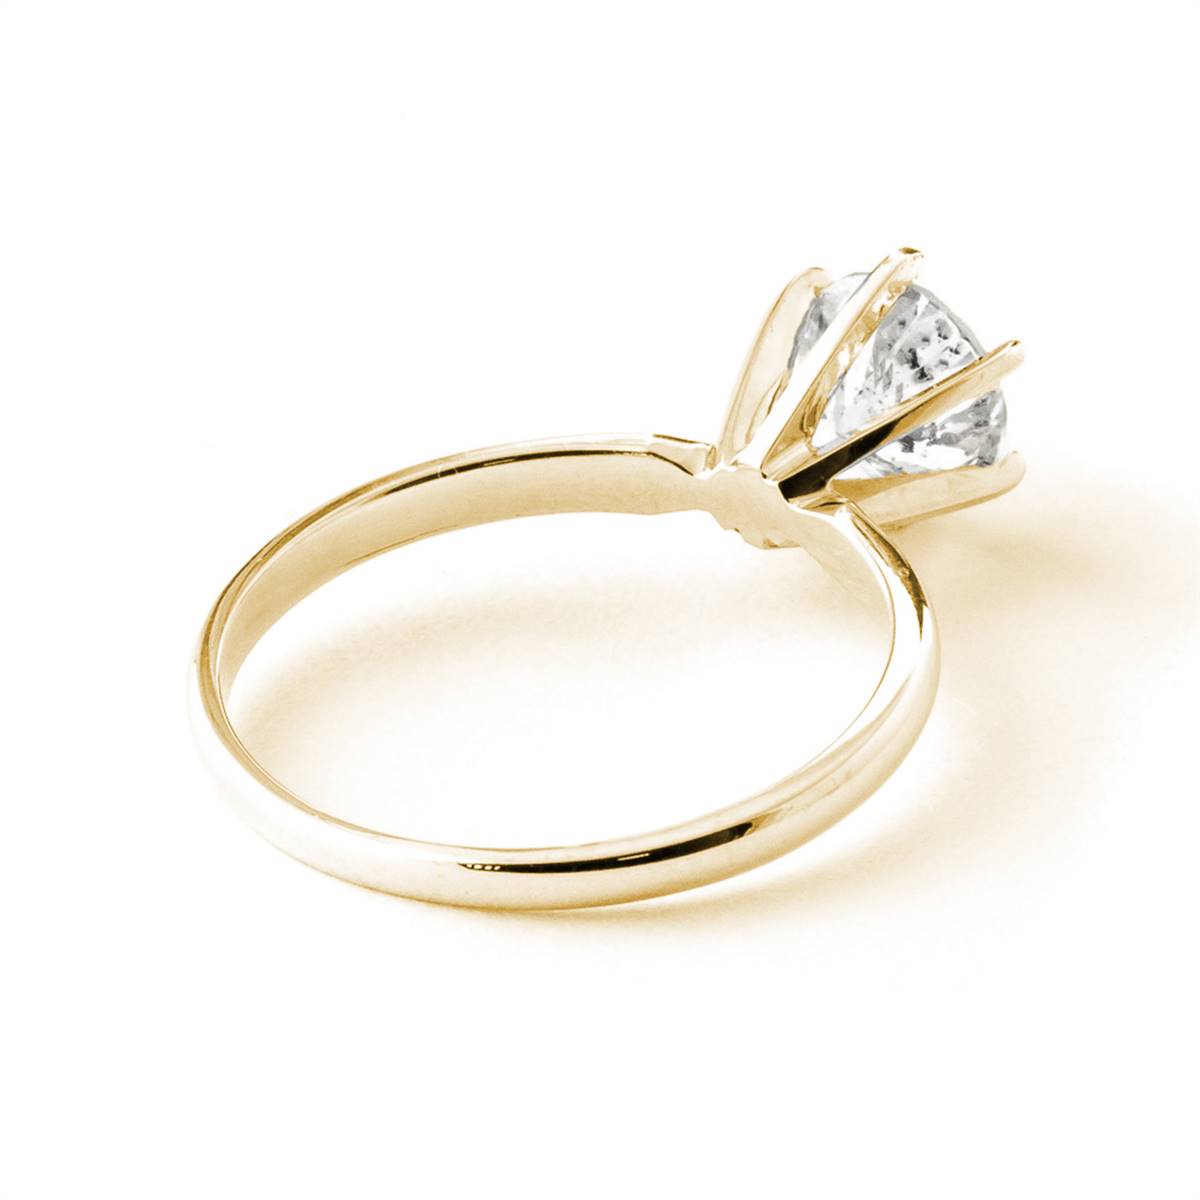 1 Carat 14K Solid Yellow Gold Solitaire Ring 1.0 Carat Si3, F-g Color Natural Diamond